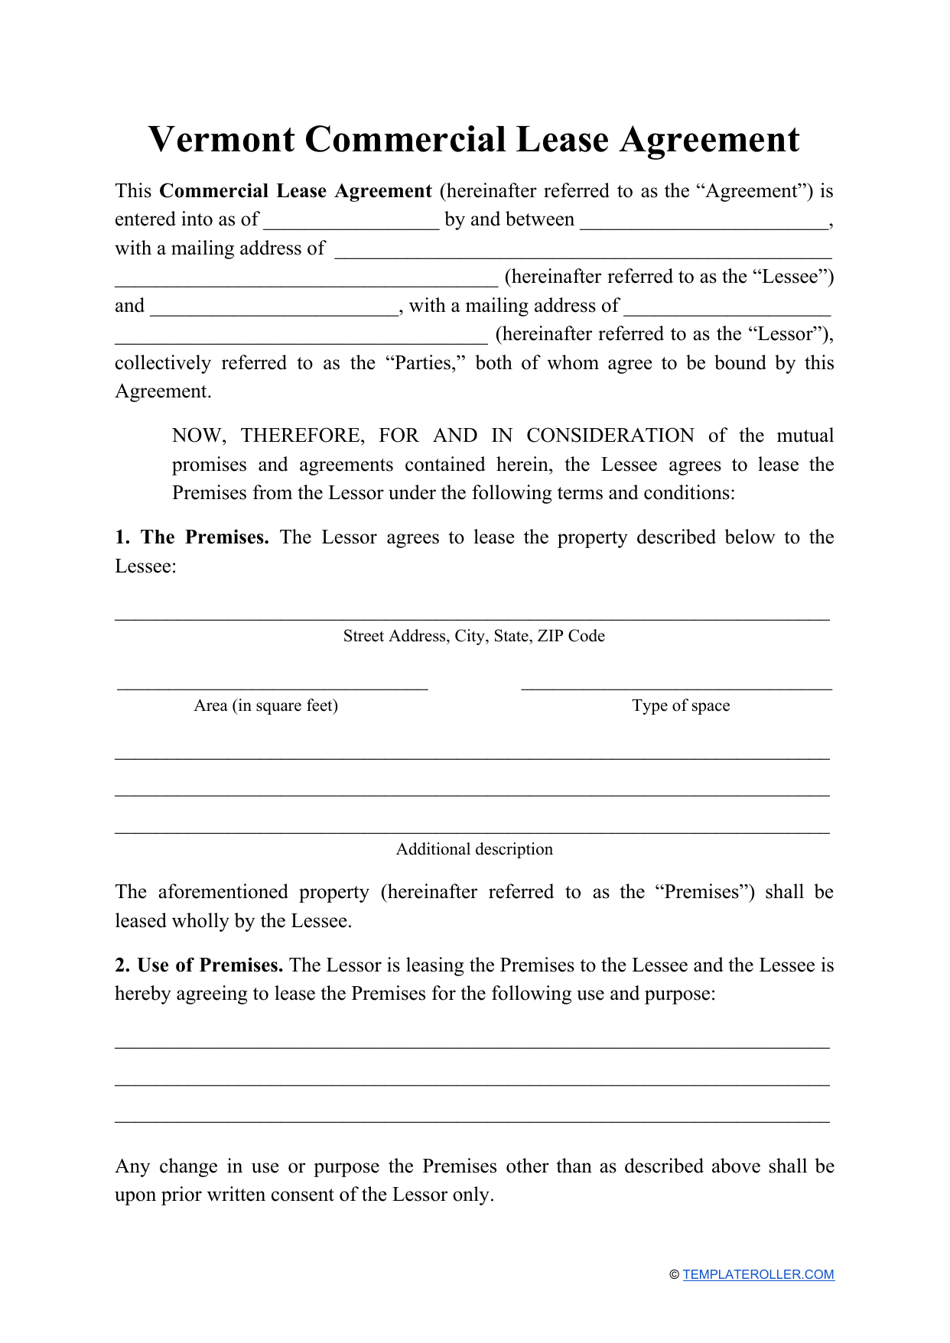 Commercial Lease Agreement Template - Vermont, Page 1